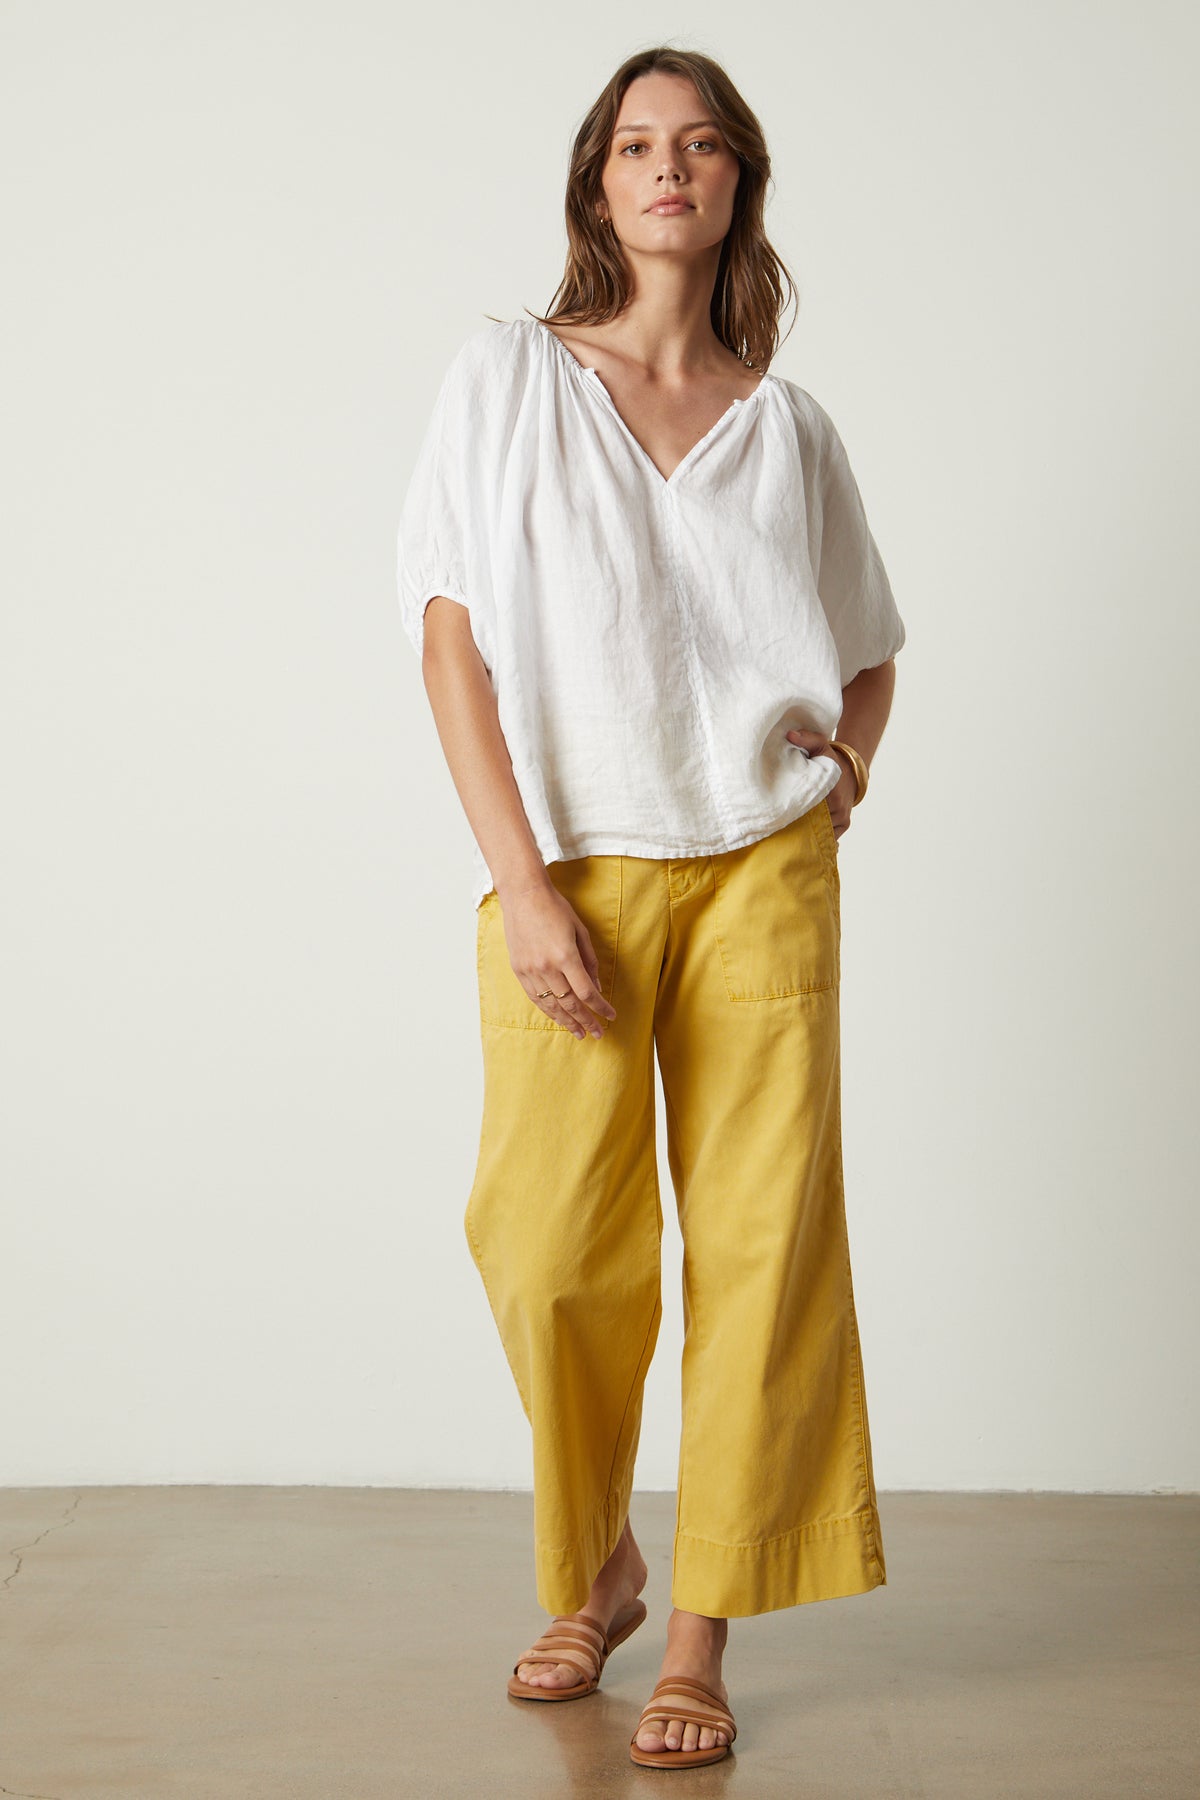 The model is wearing a Velvet by Graham & Spencer JANINE LINEN TOP and yellow wide leg pants.-26445315539137